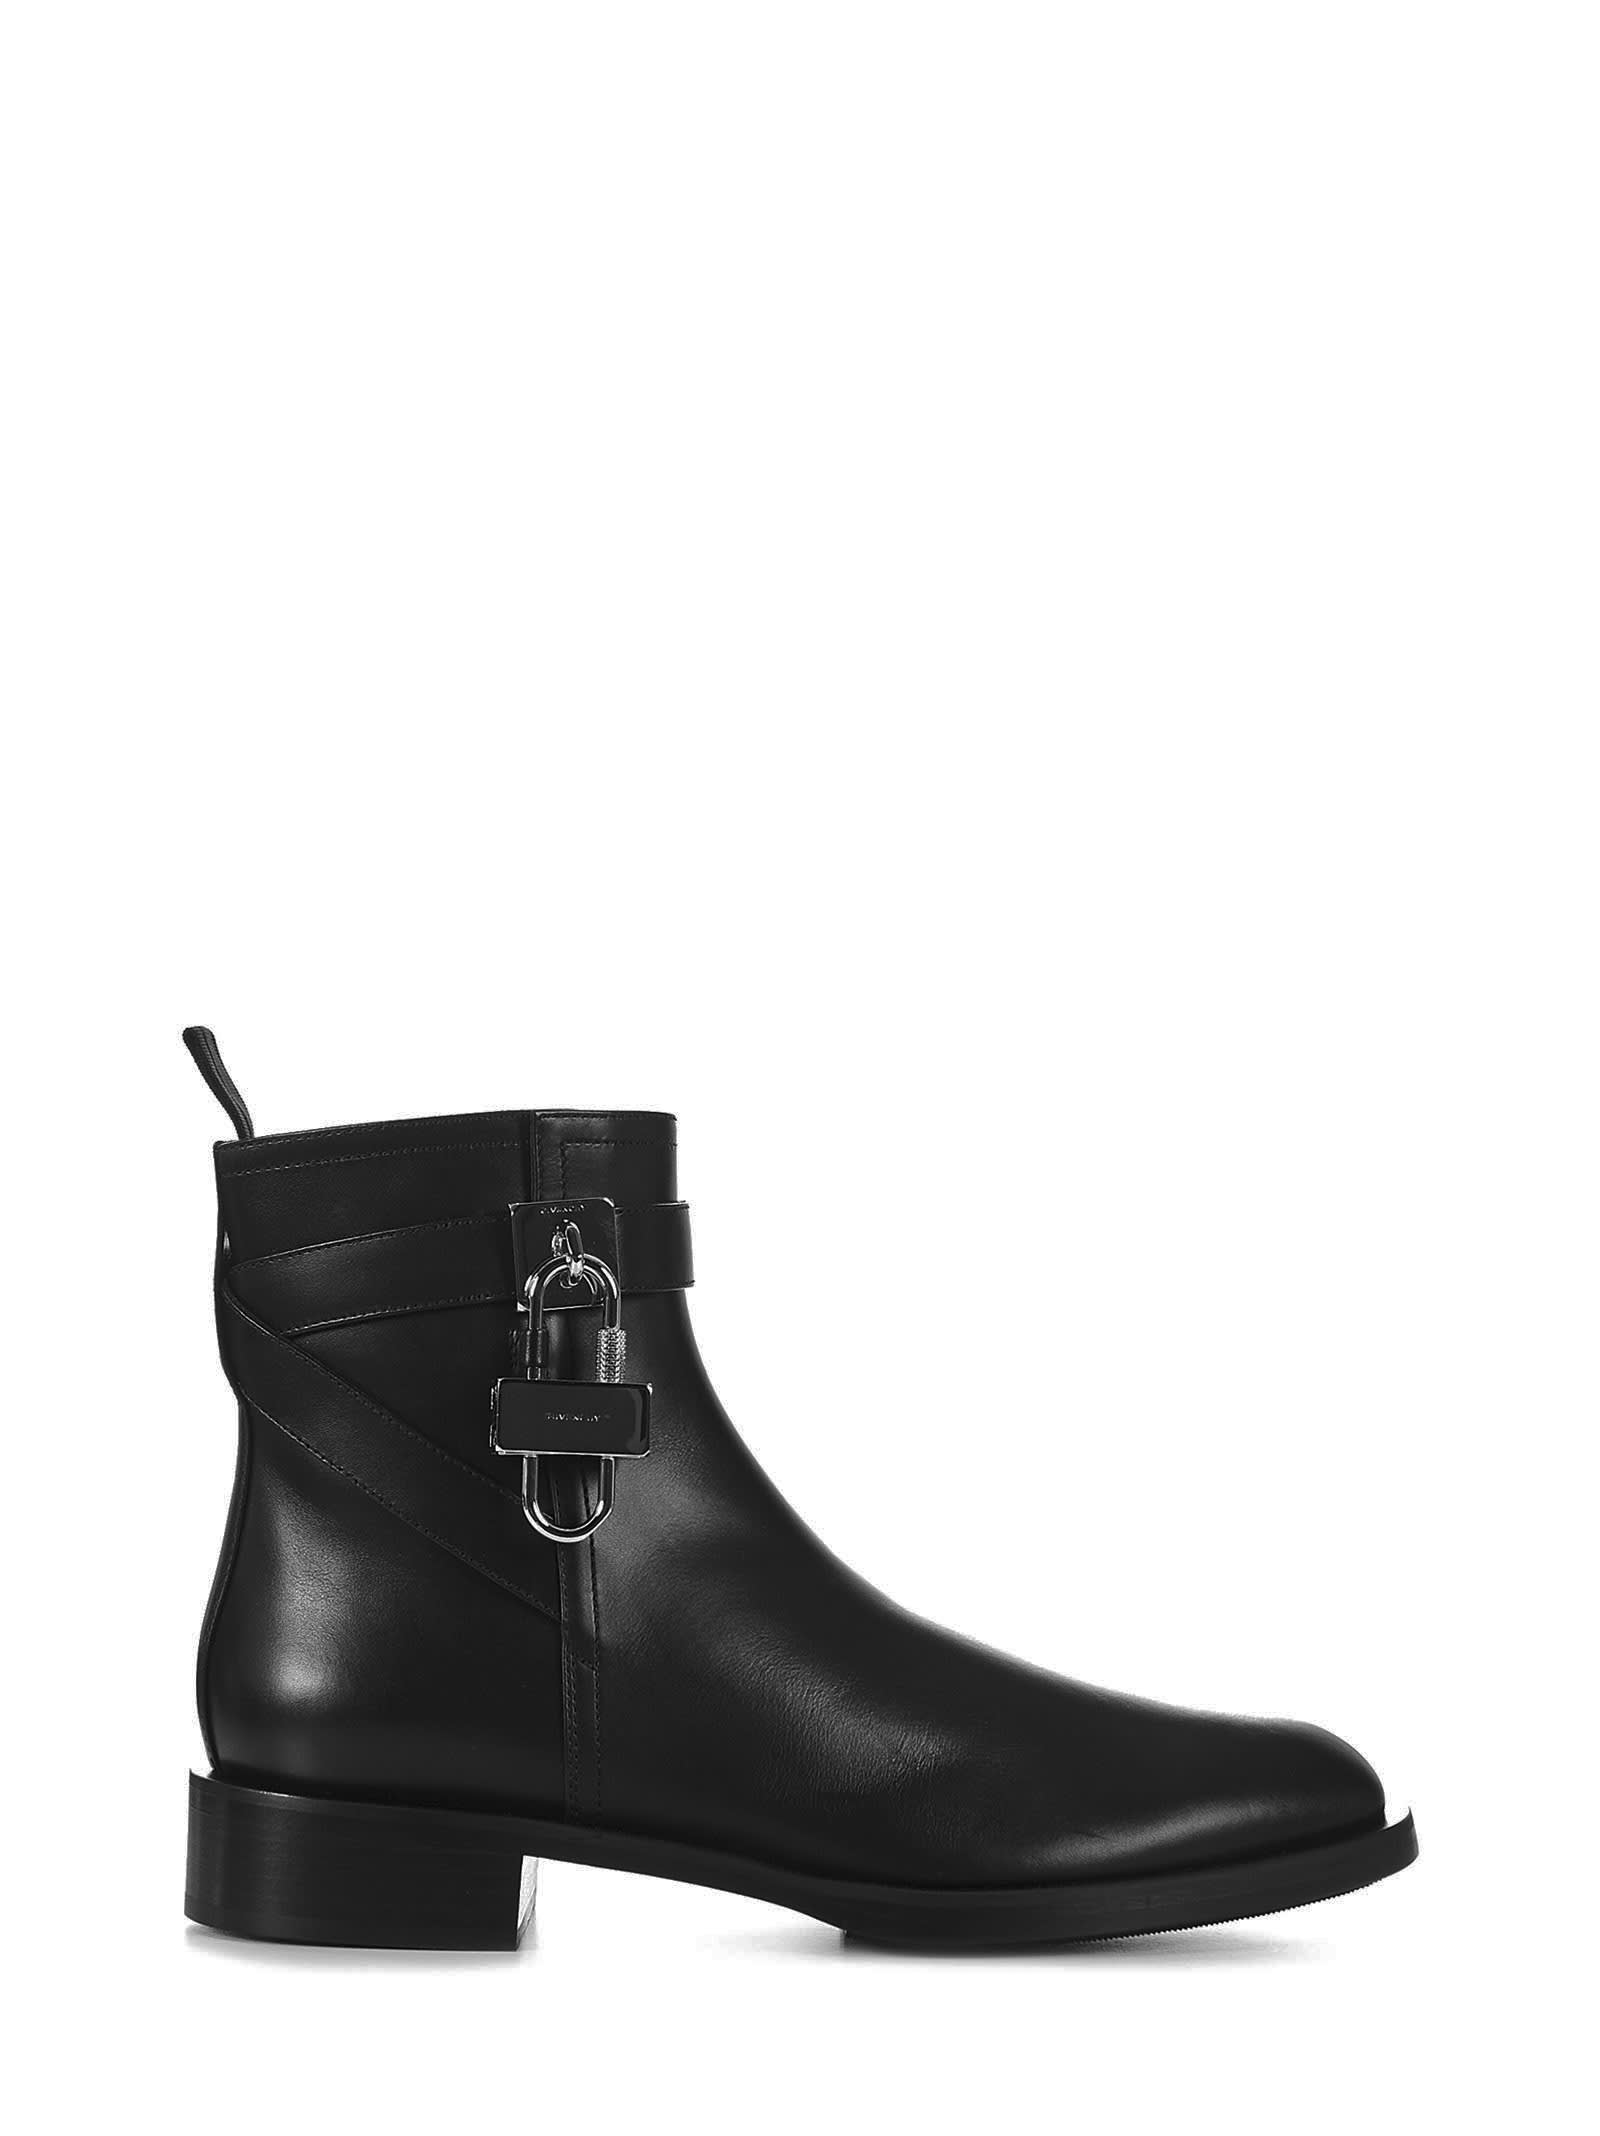 Givenchy Lock Boots